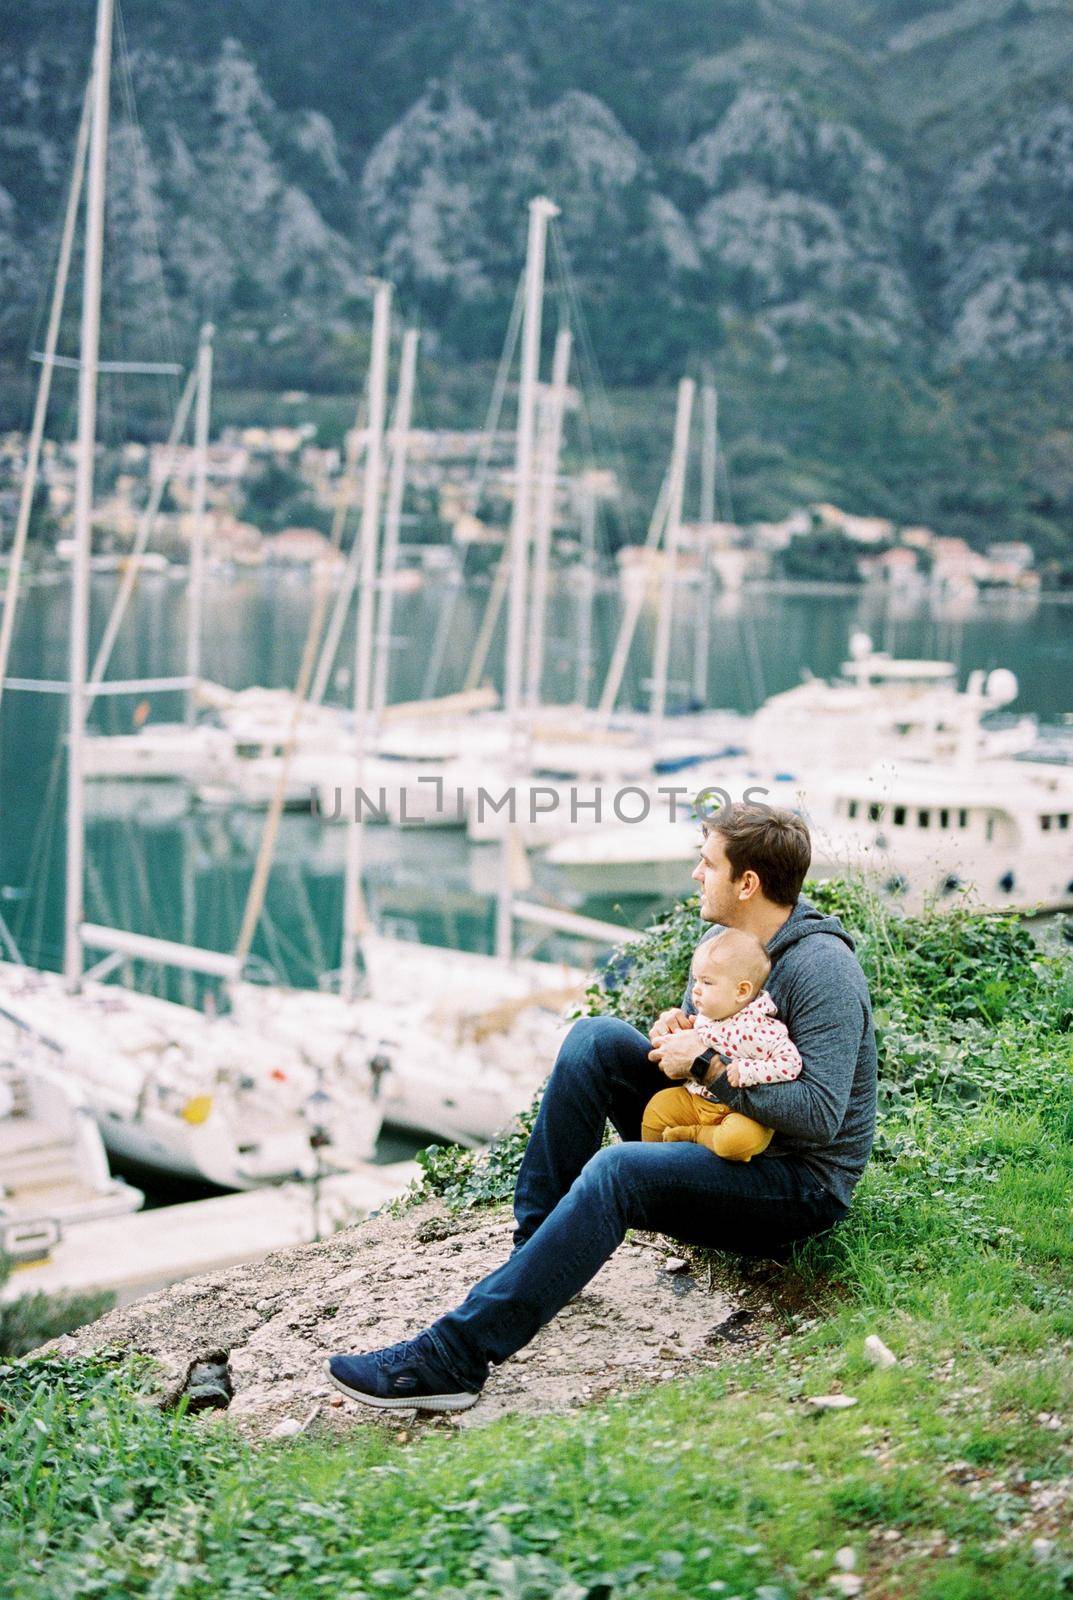 Dad with a baby on his knee sits on a hill and looks at the marina with moored yachts. High quality photo